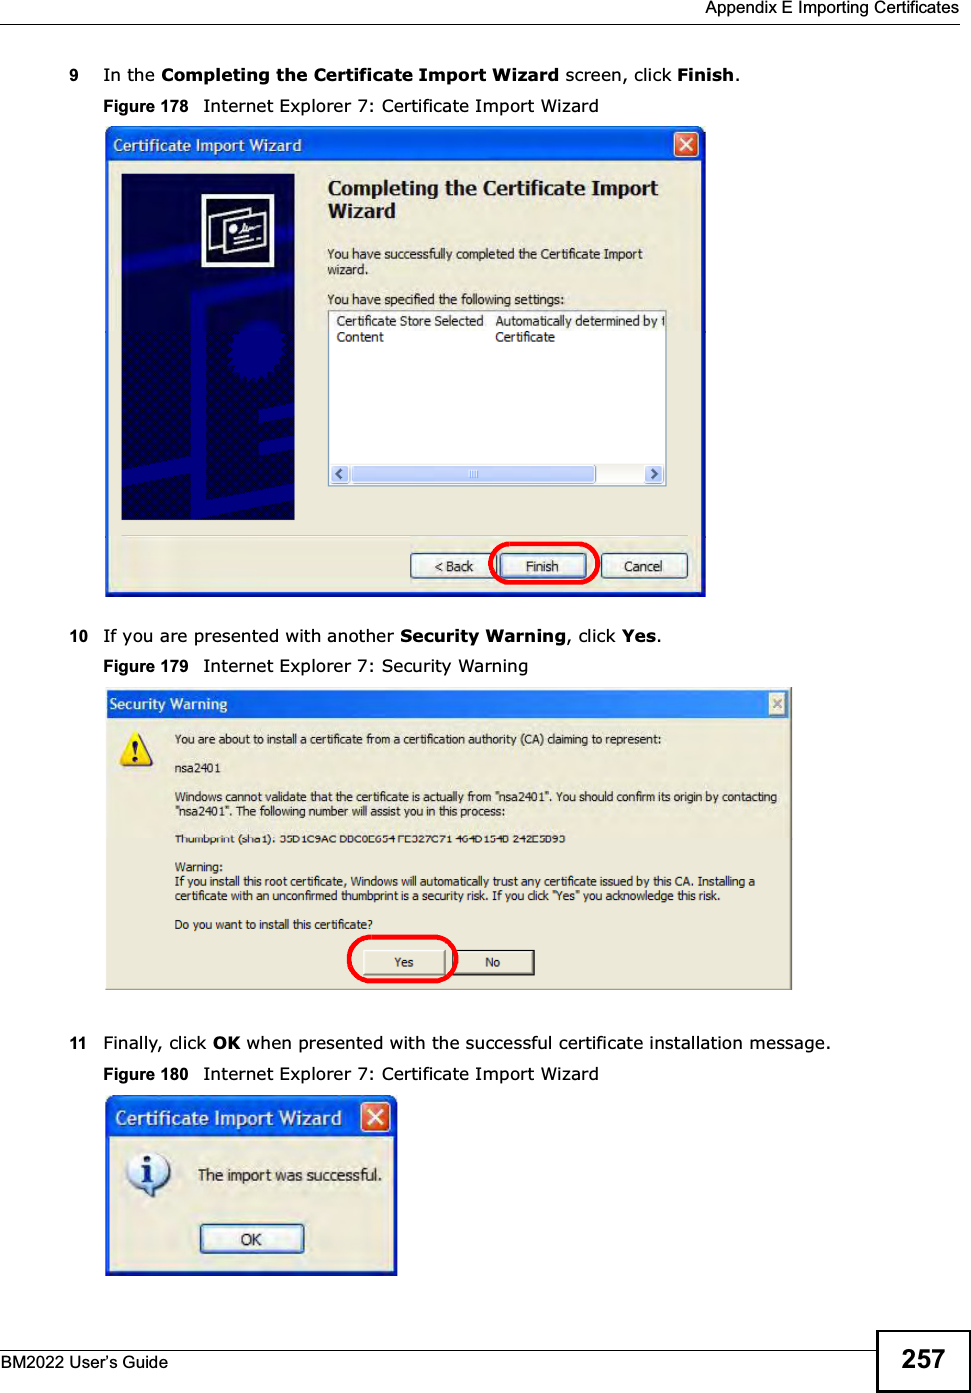  Appendix E Importing CertificatesBM2022 Users Guide 2579In the Completing the Certificate Import Wizard screen, click Finish.Figure 178   Internet Explorer 7: Certificate Import Wizard10 If you are presented with another Security Warning, click Yes.Figure 179   Internet Explorer 7: Security Warning11 Finally, click OK when presented with the successful certificate installation message.Figure 180   Internet Explorer 7: Certificate Import Wizard